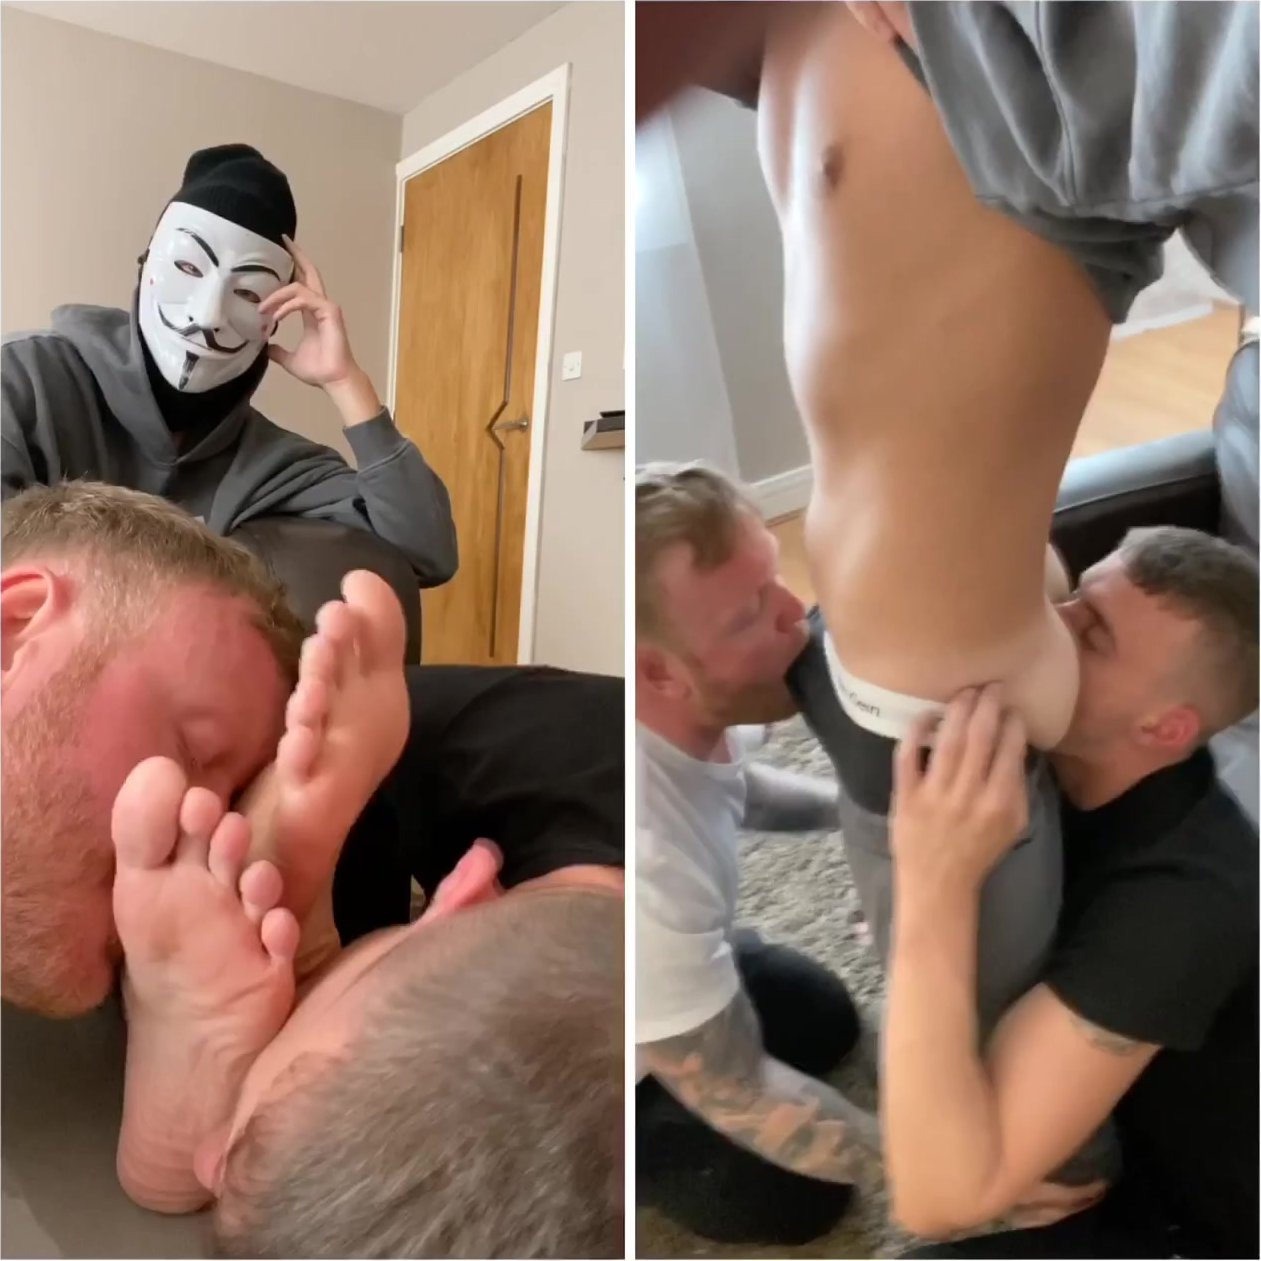 Two slaves lick feet, suck dick, and eat ass